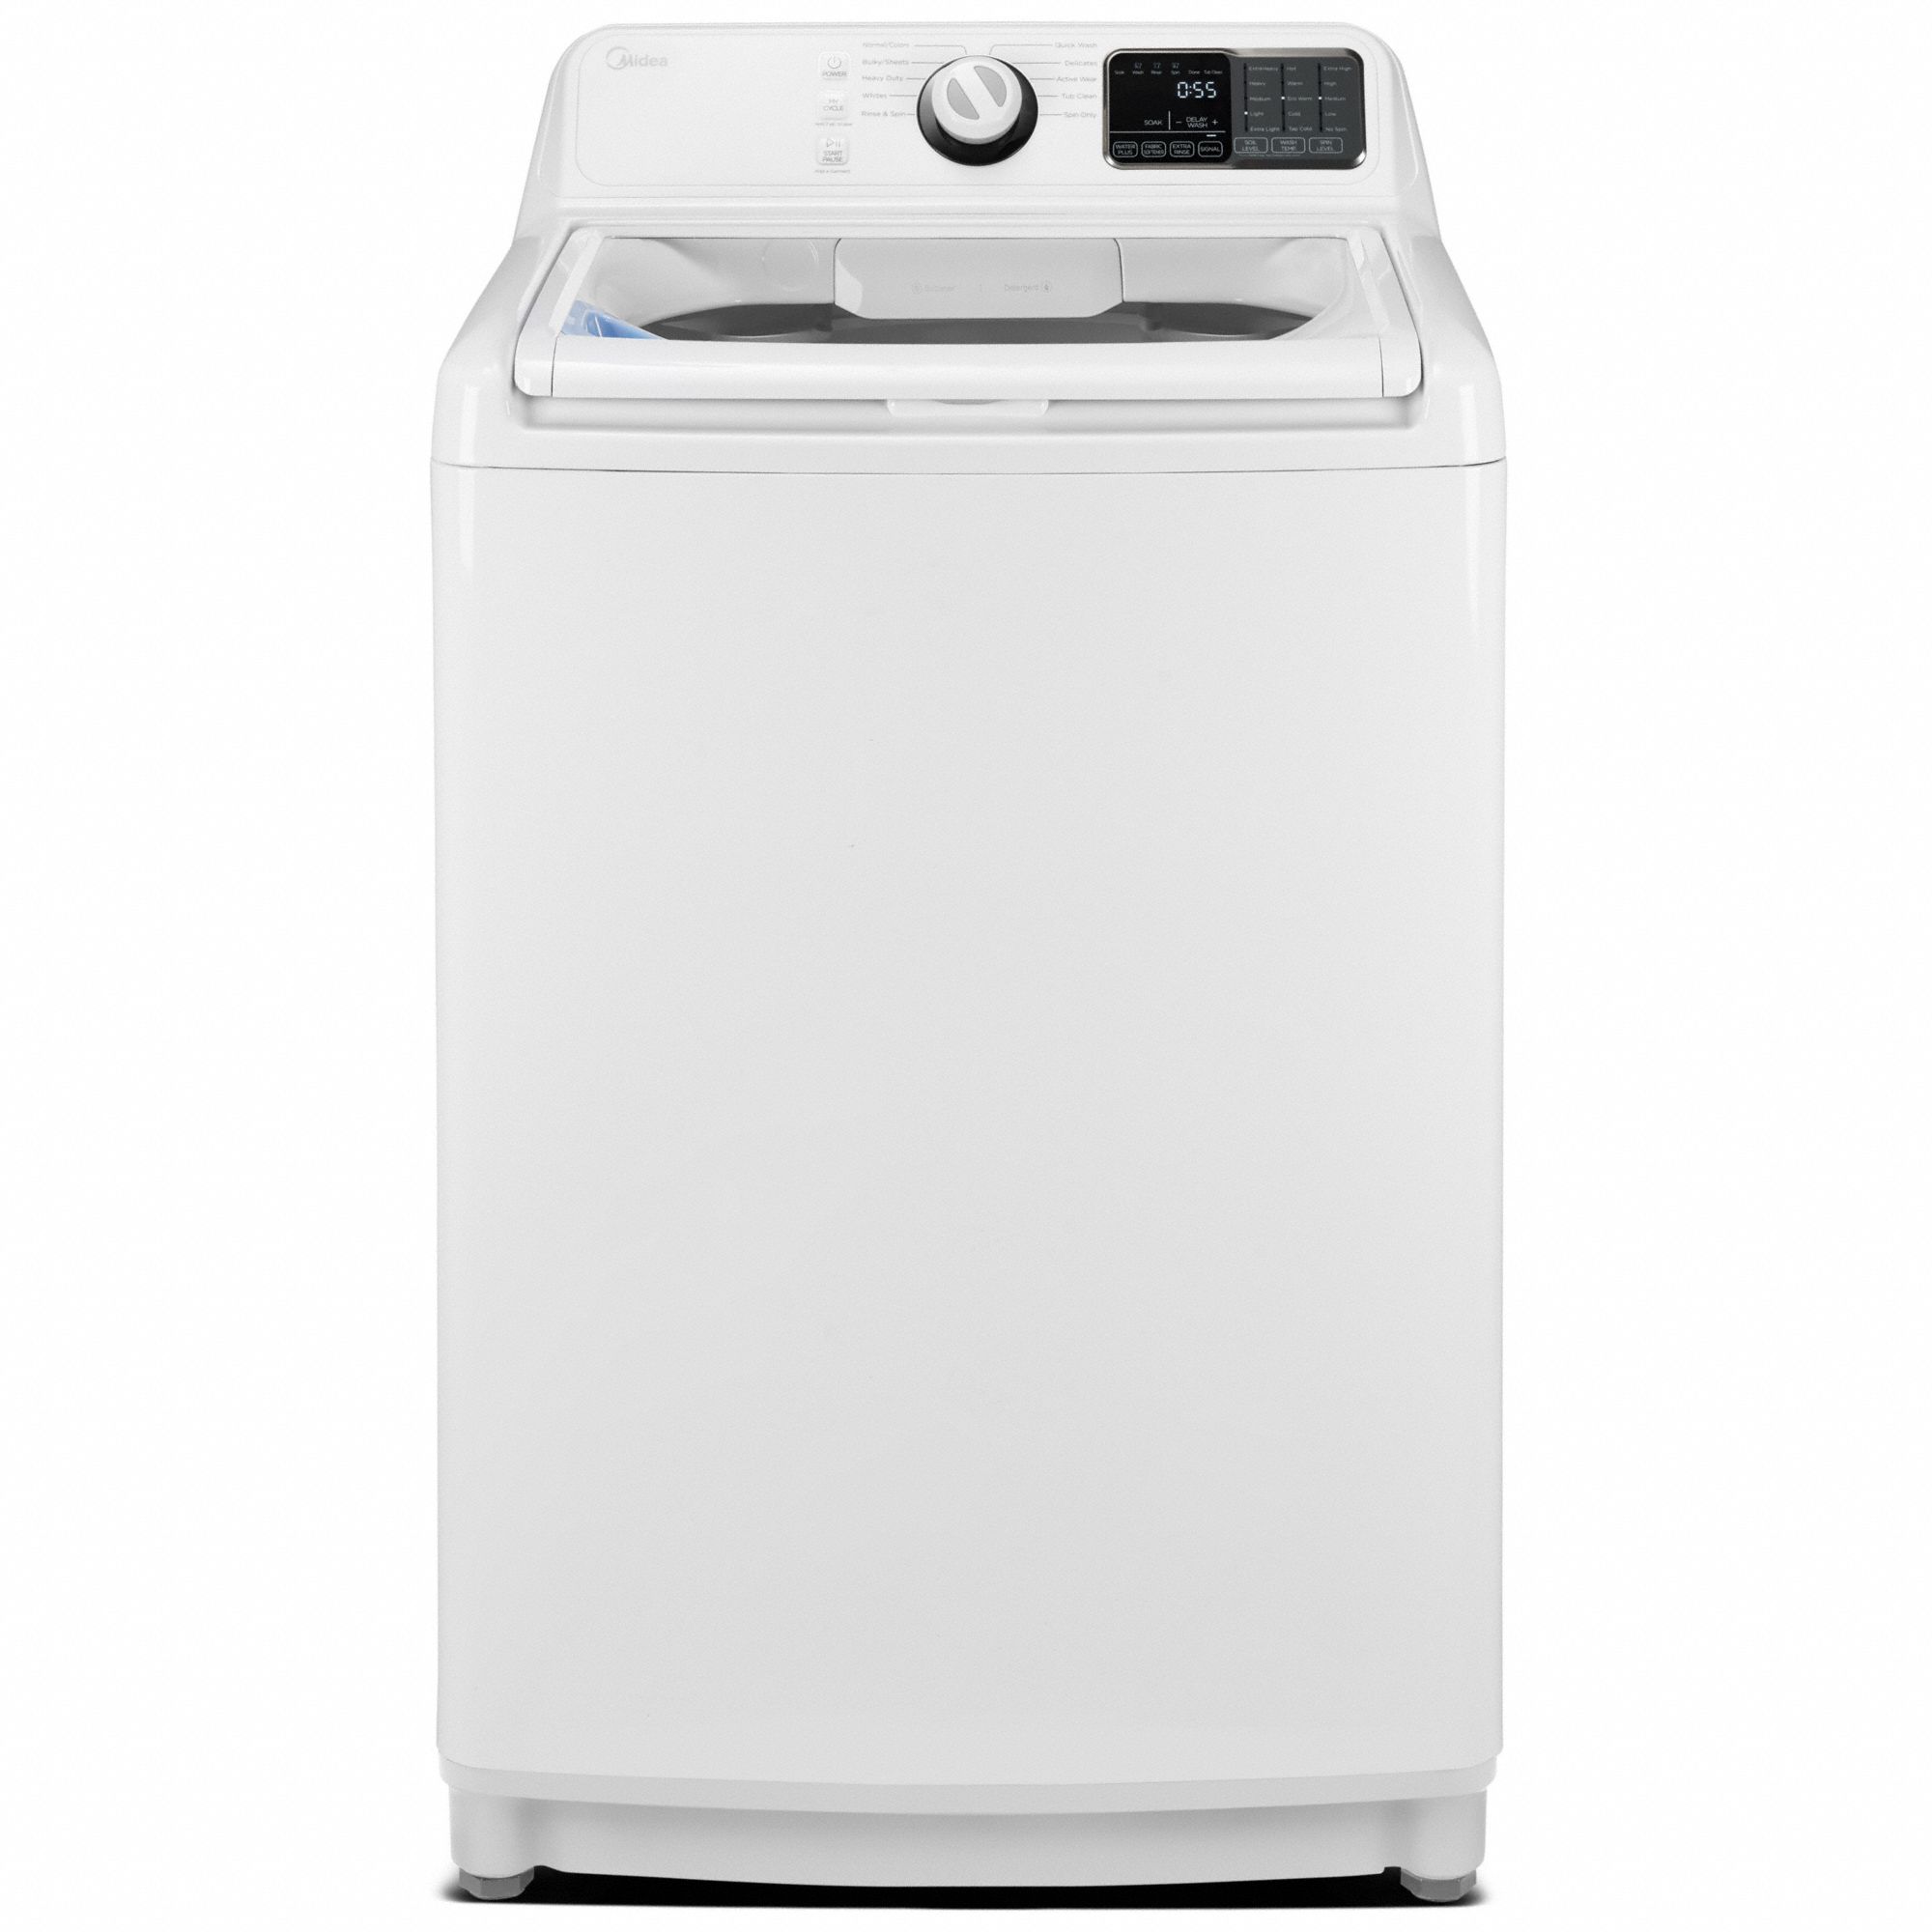 Washer: White, 4.5 cu ft Capacity, Top Load, Stackable, Energy Star Certified